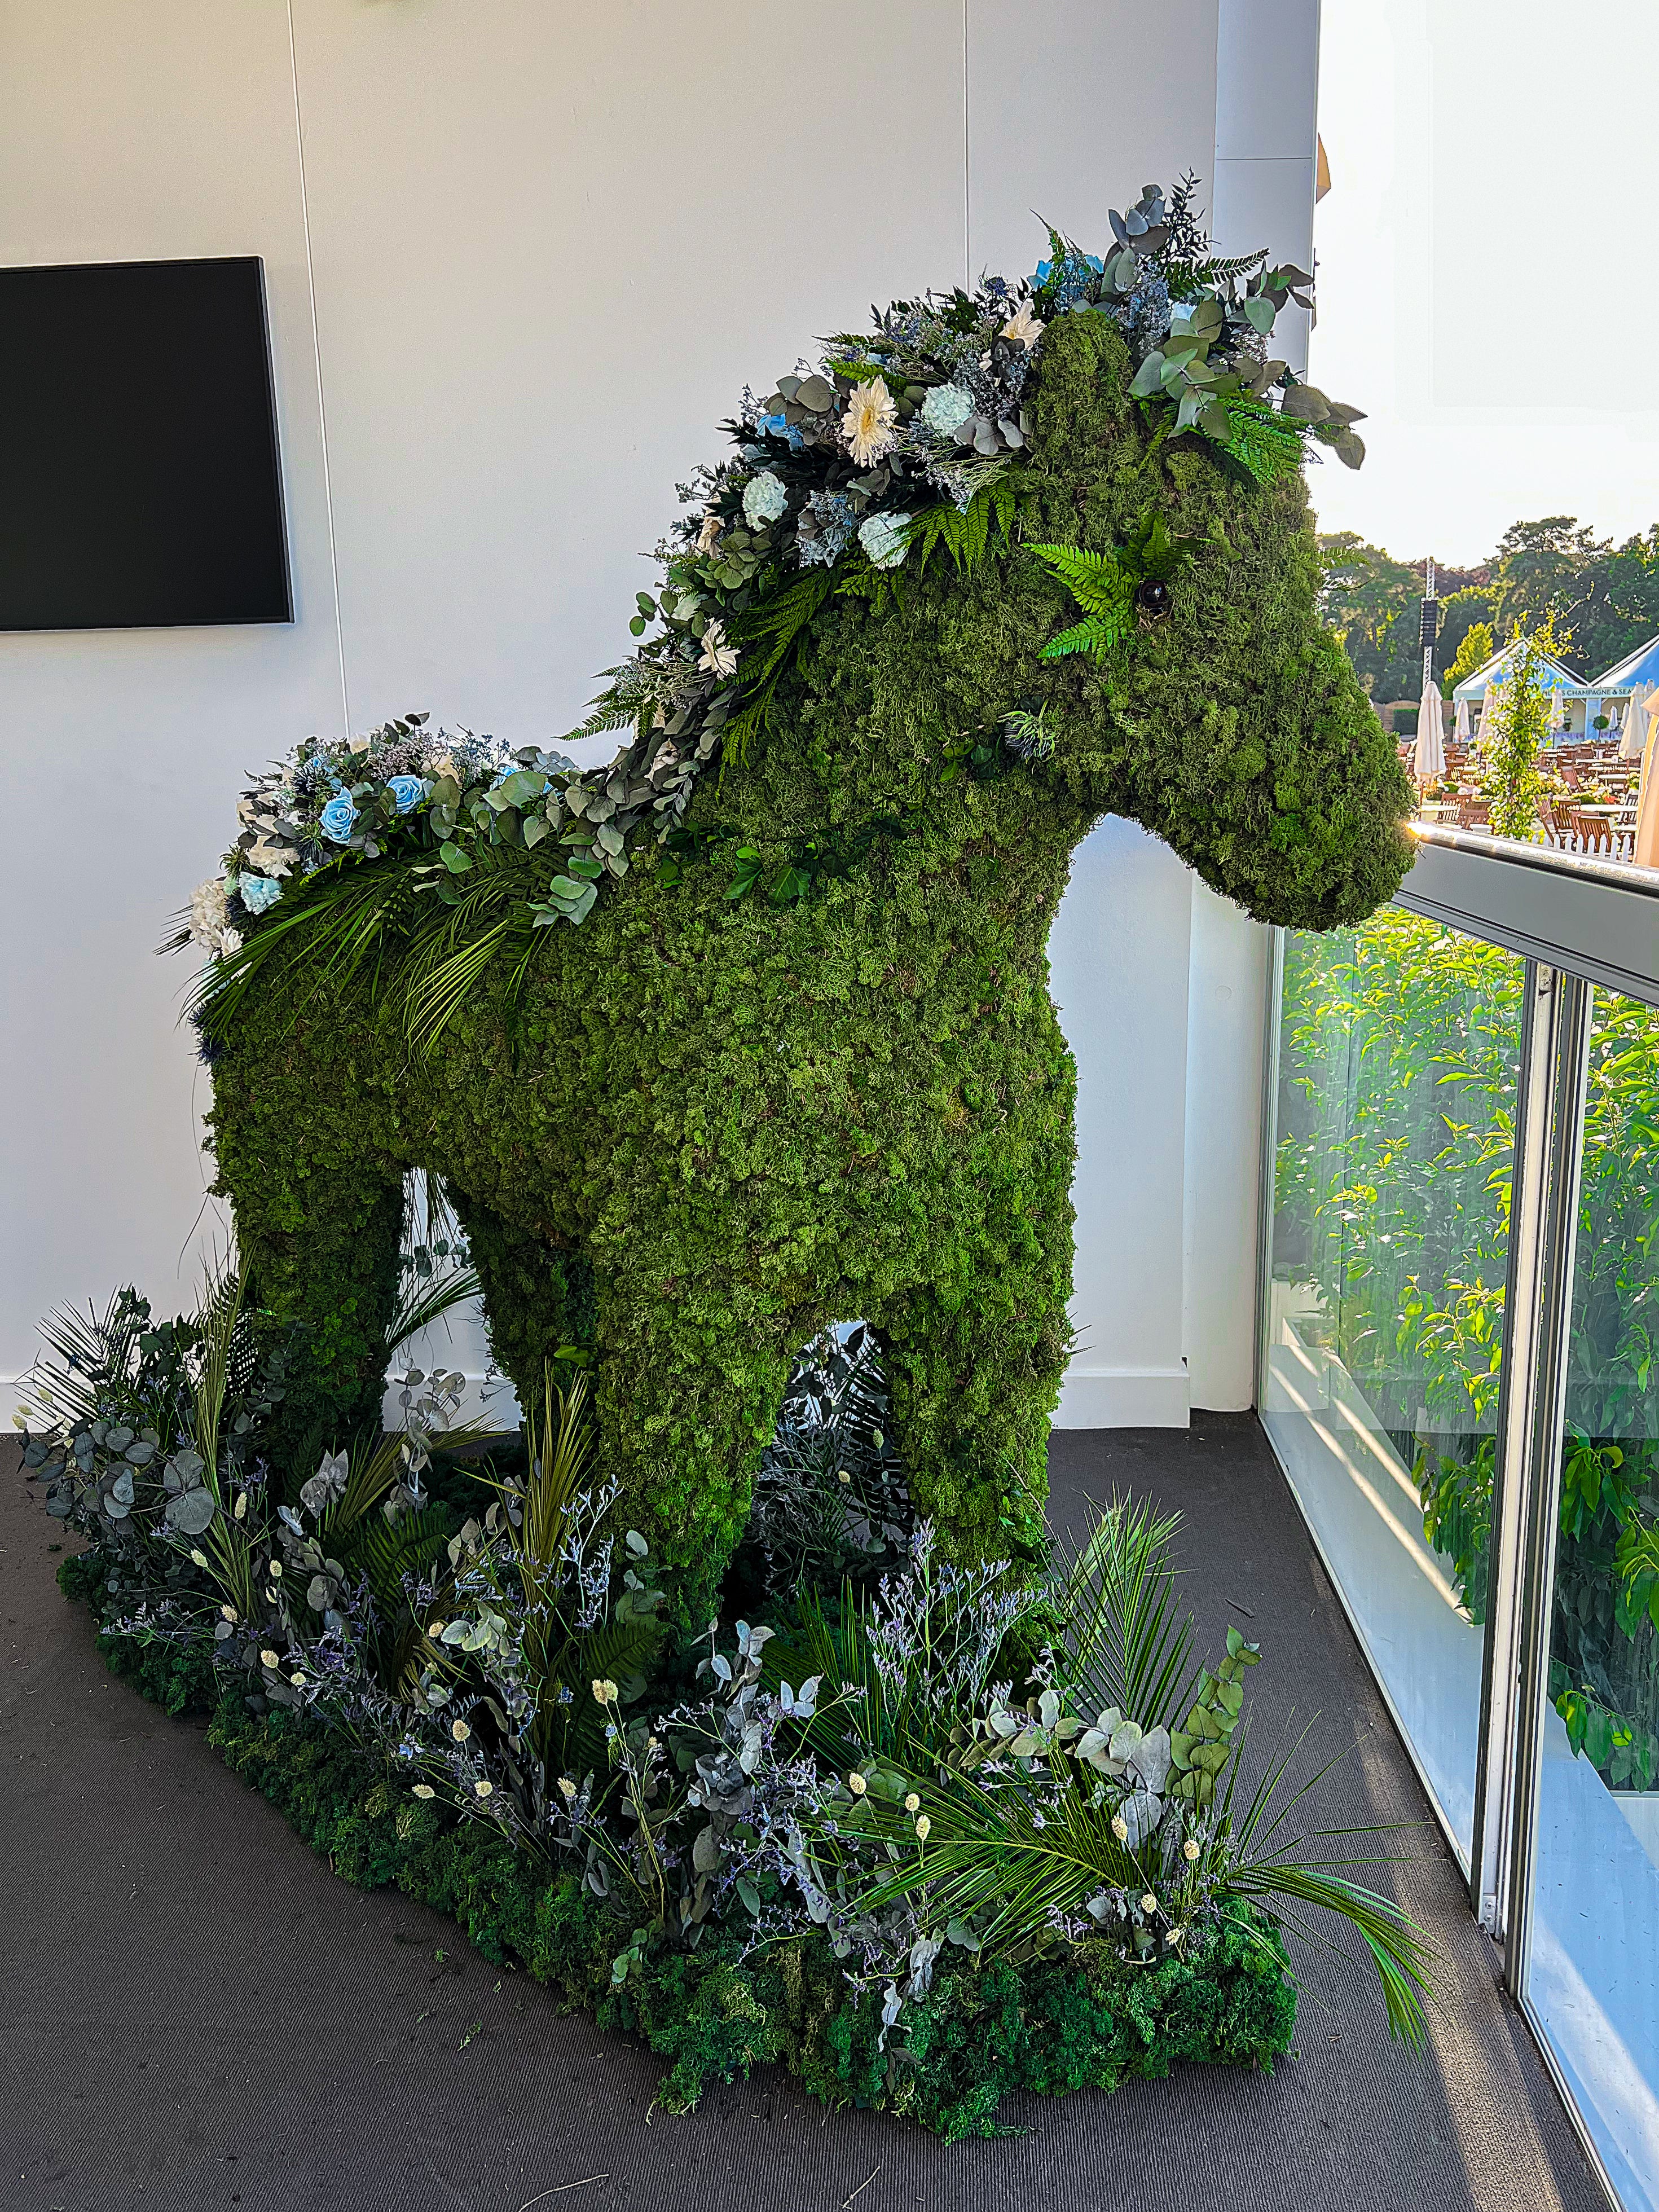 For their prestigious event, Royal Ascot required an event florist to transform areas of their event with beautiful floral installations unique to them.